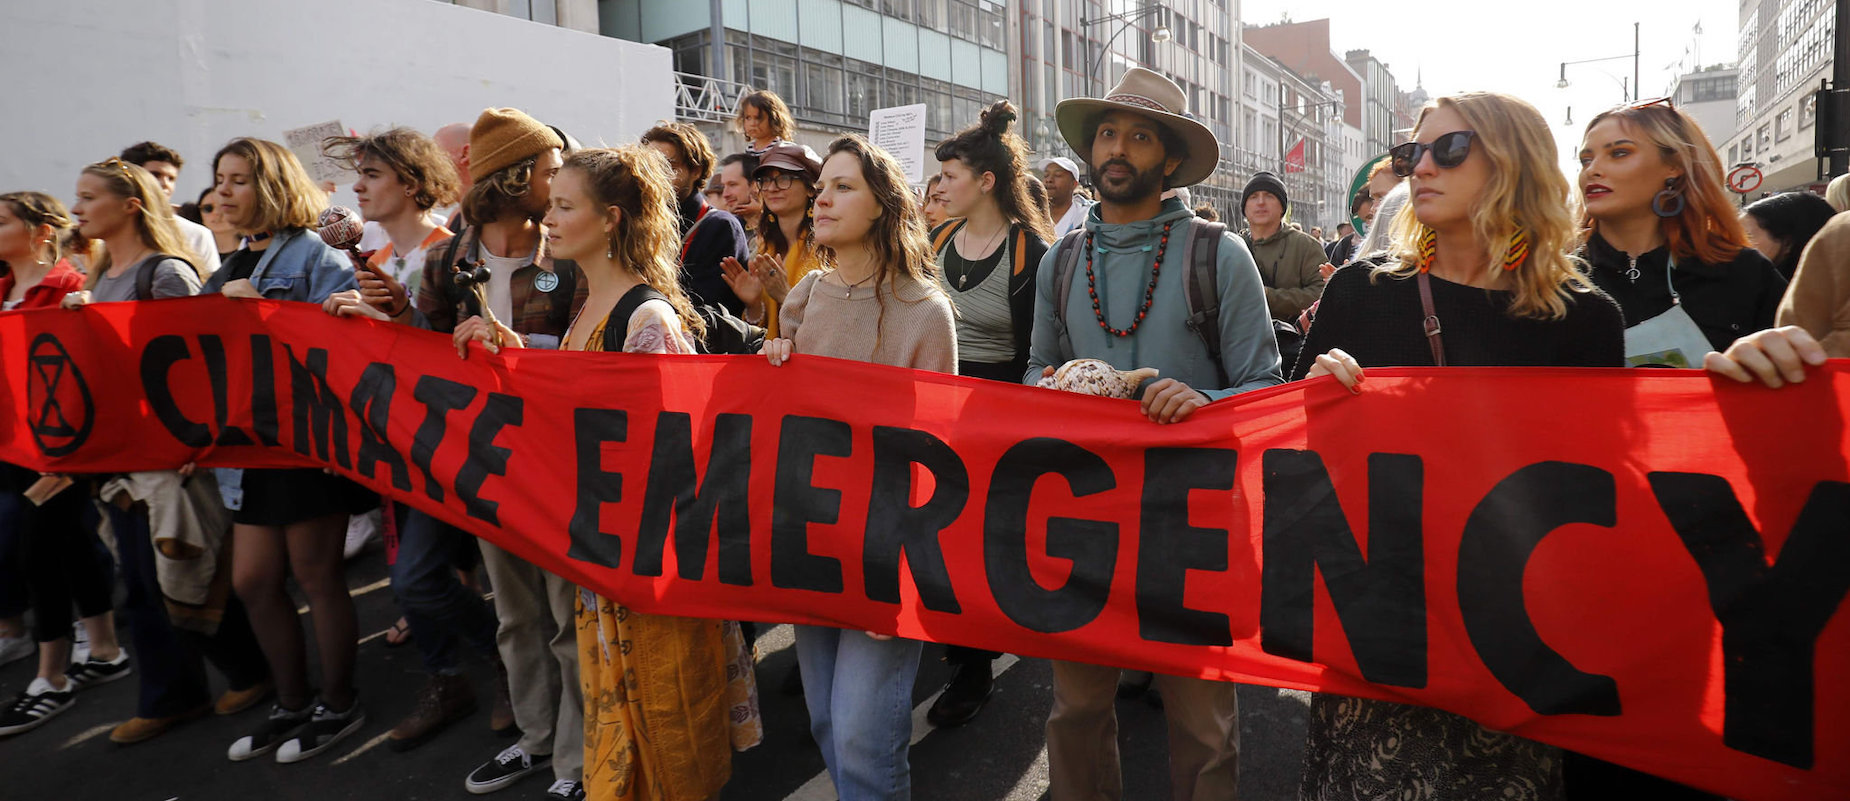 Climate change activists rally at Oxford Circus in central London on April 18, 2019, the fourth day of an environmental protest by the Extinction Rebellion group. - Climate change activists on Thursday brought parts of the British capital to a standstill in a fourth consecutive day of demonstrations that have so far led to more than 400 arrests. (Photo by Tolga AKMEN / AFP)TOLGA AKMEN/AFP/Getty Images